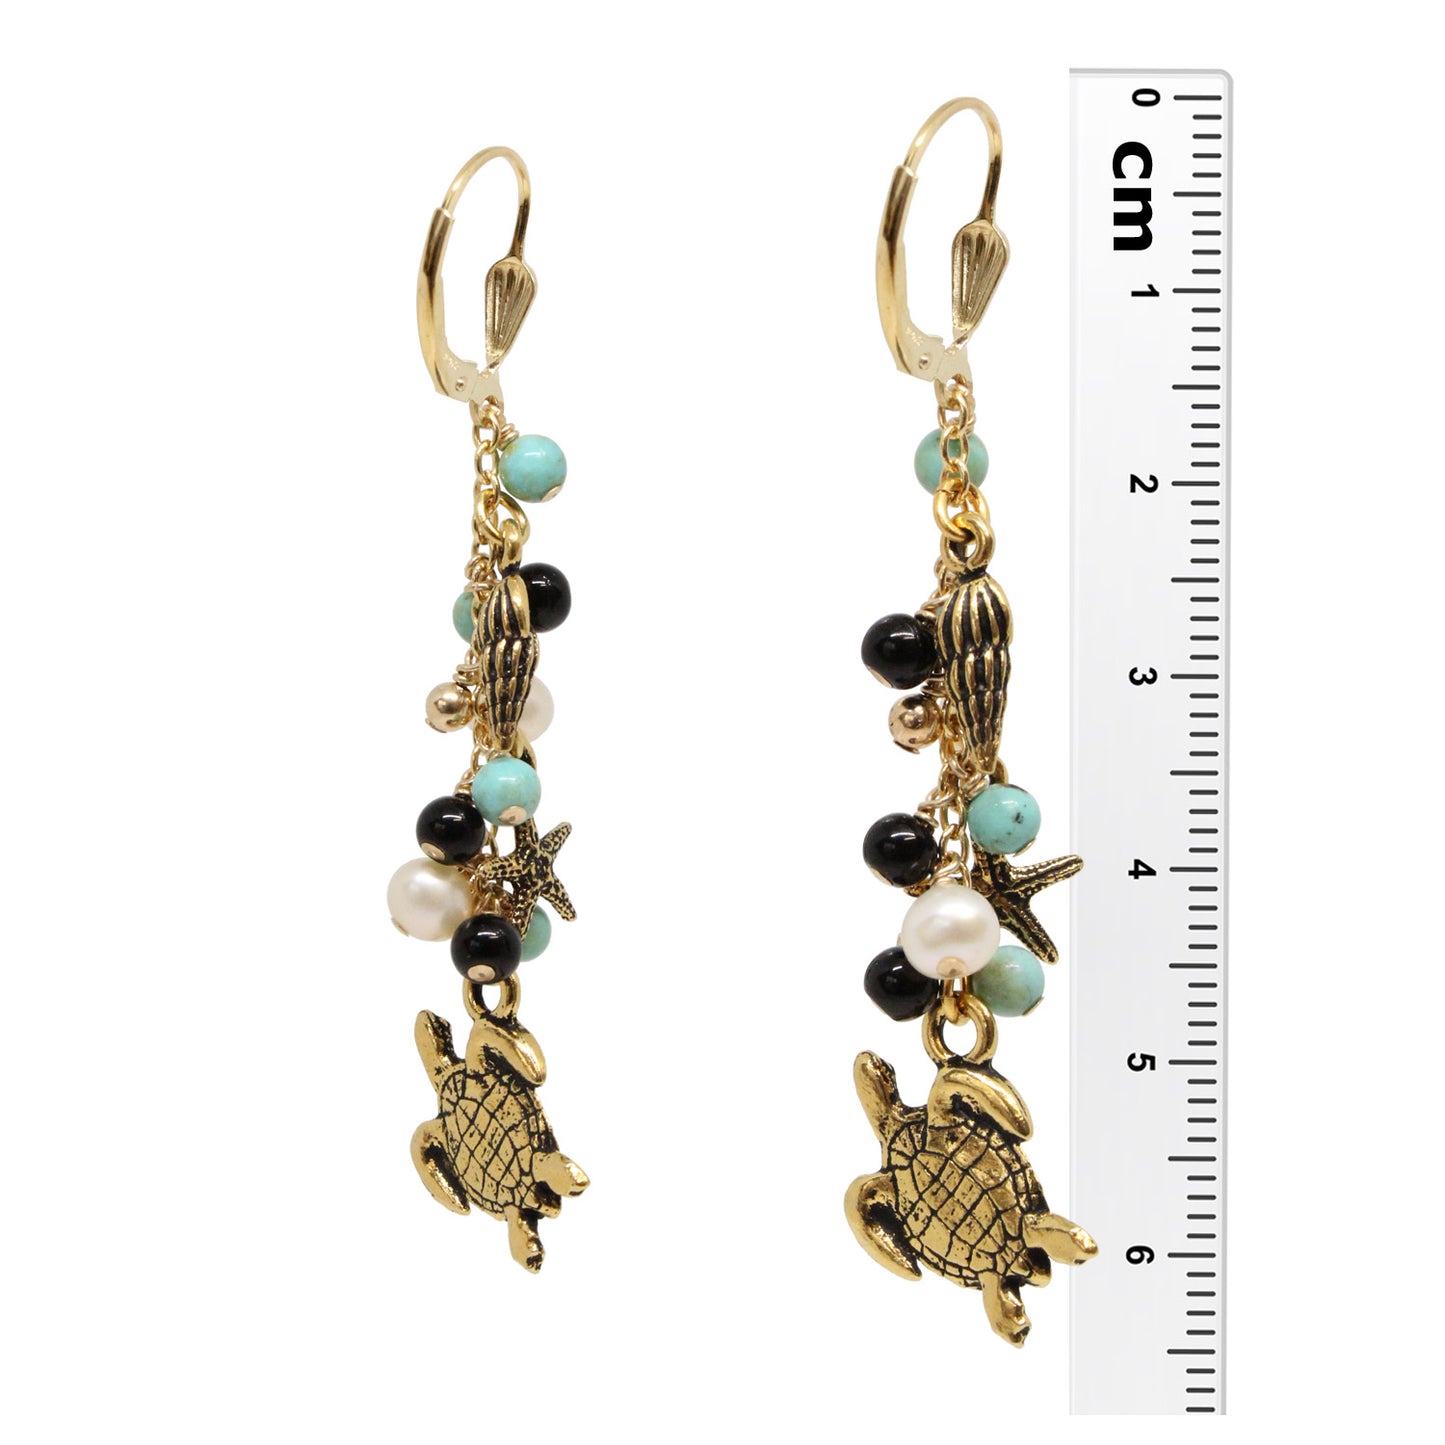 Turquoise Island Cascade Earrings / 65mm length / sea turtle charms / gold filled shell leverback earwires